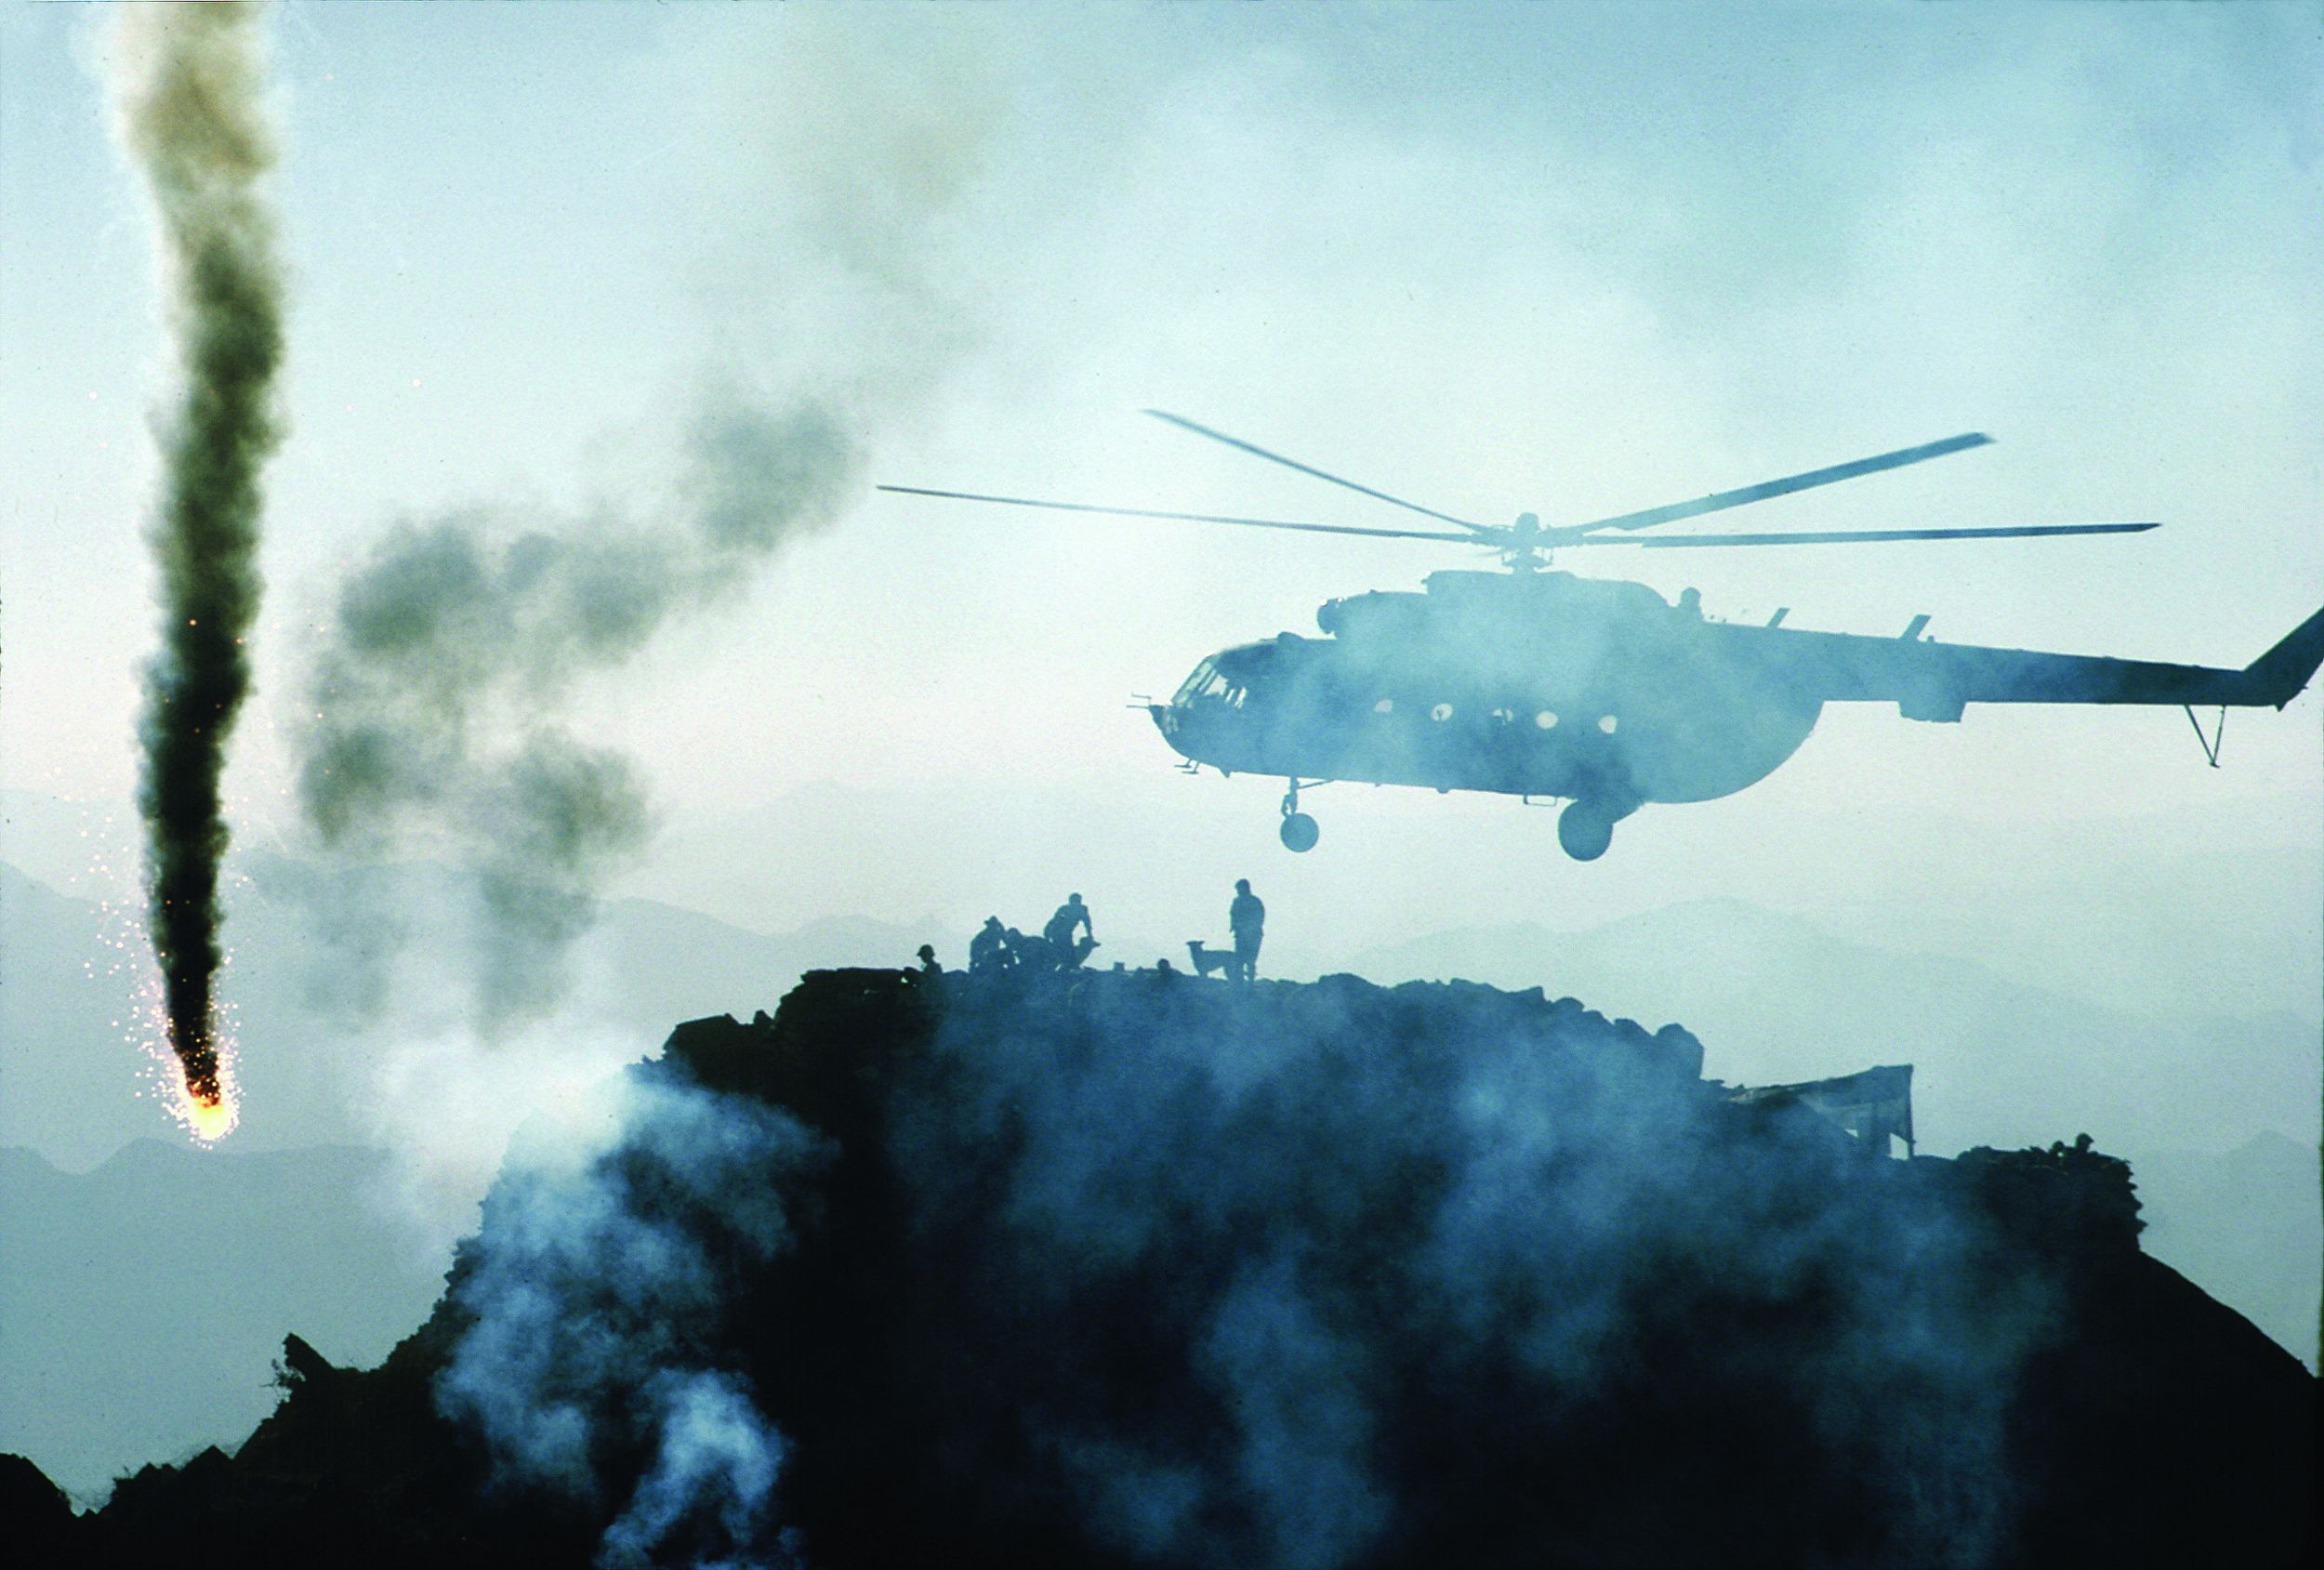 A Russian Army MI-8 helicopter fires on a guerrilla-held hot spot. The Soviets, like the Americans in Vietnam, made much use of helicopters for aerial firepower and troop movements.